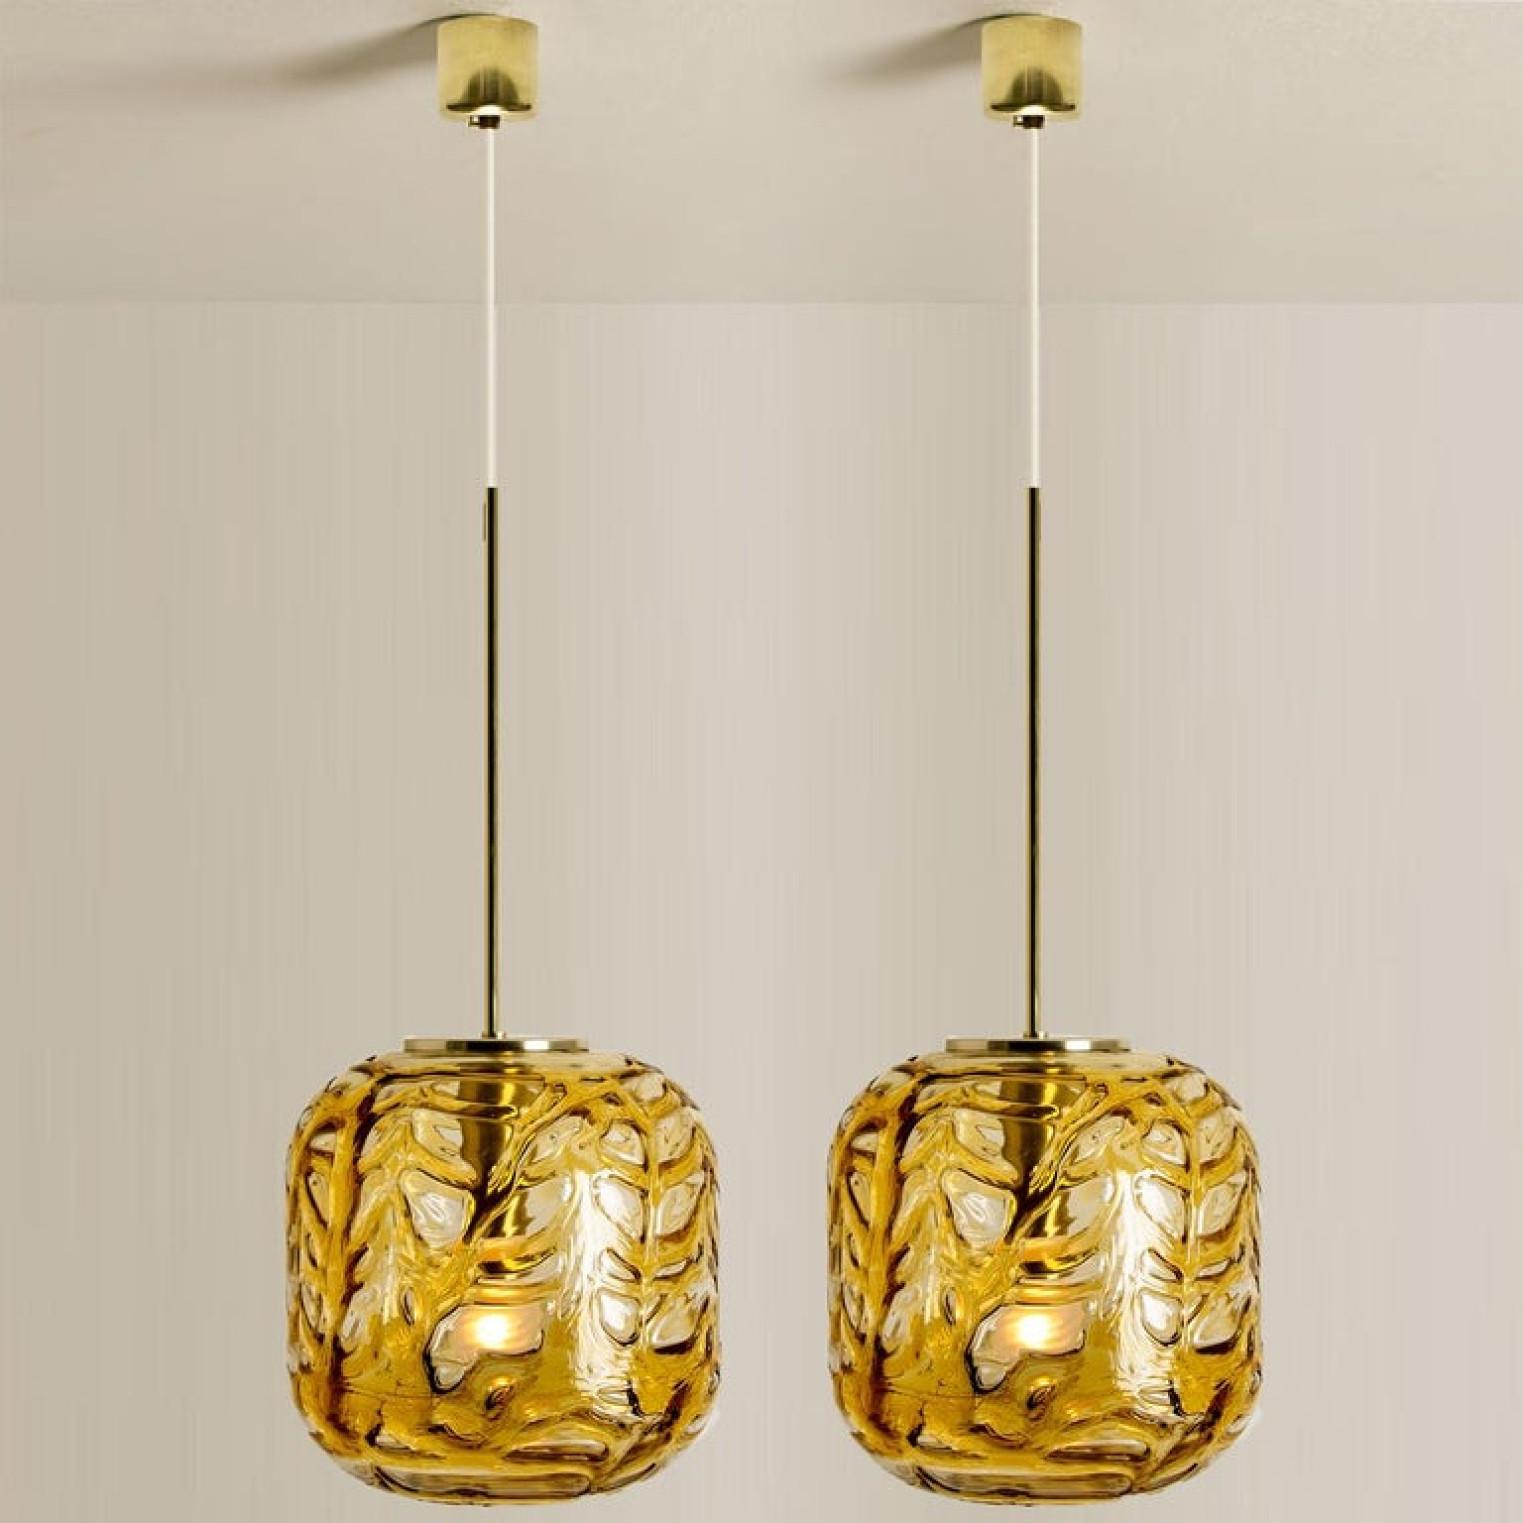 Exceptional Pair of Amber Murano Glass Pendant Lights Venini Style, 1970 For Sale 4